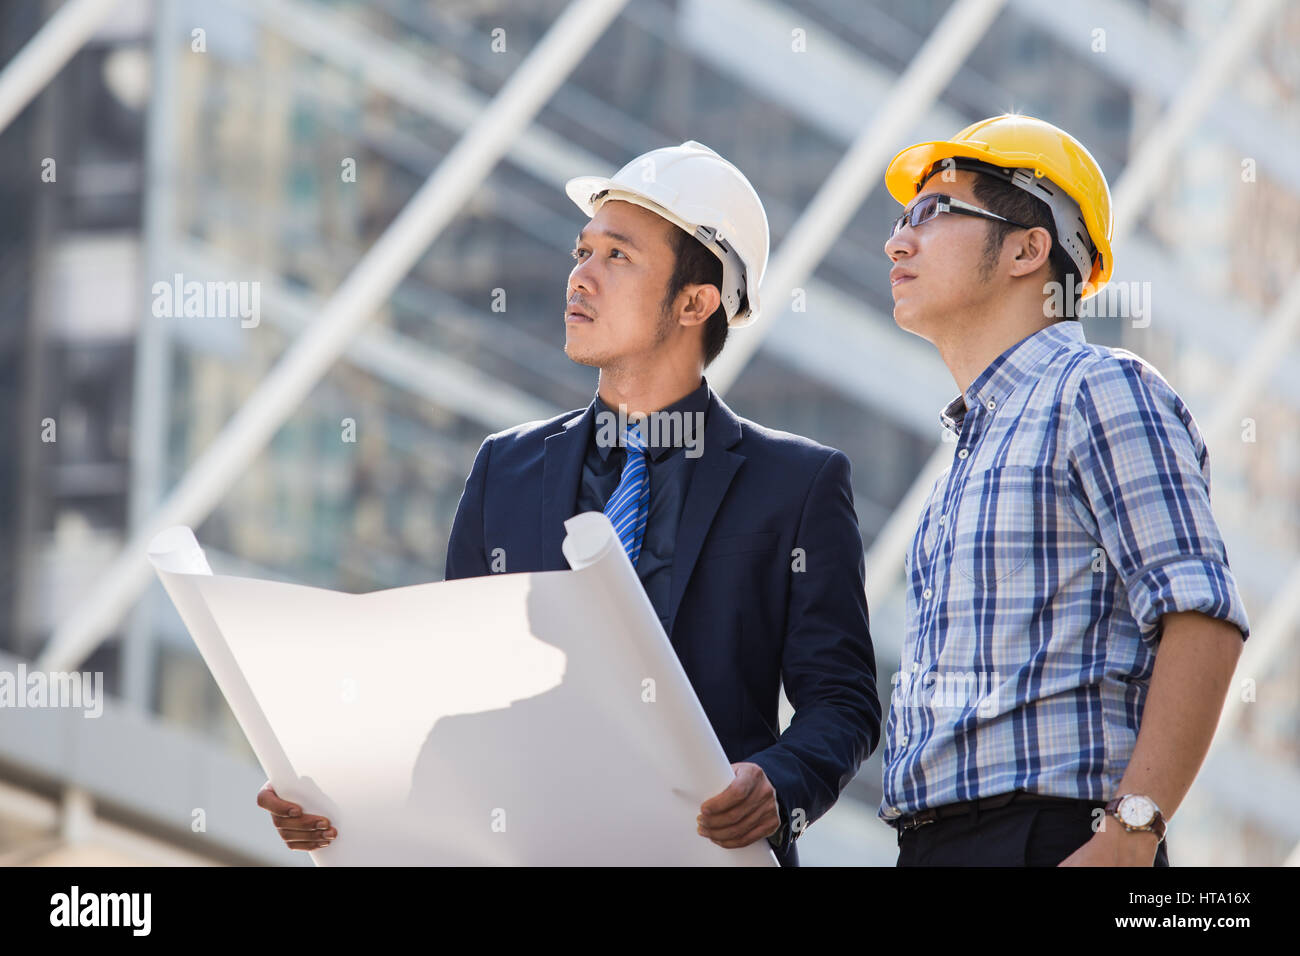 how to become an architectural and engineering manager